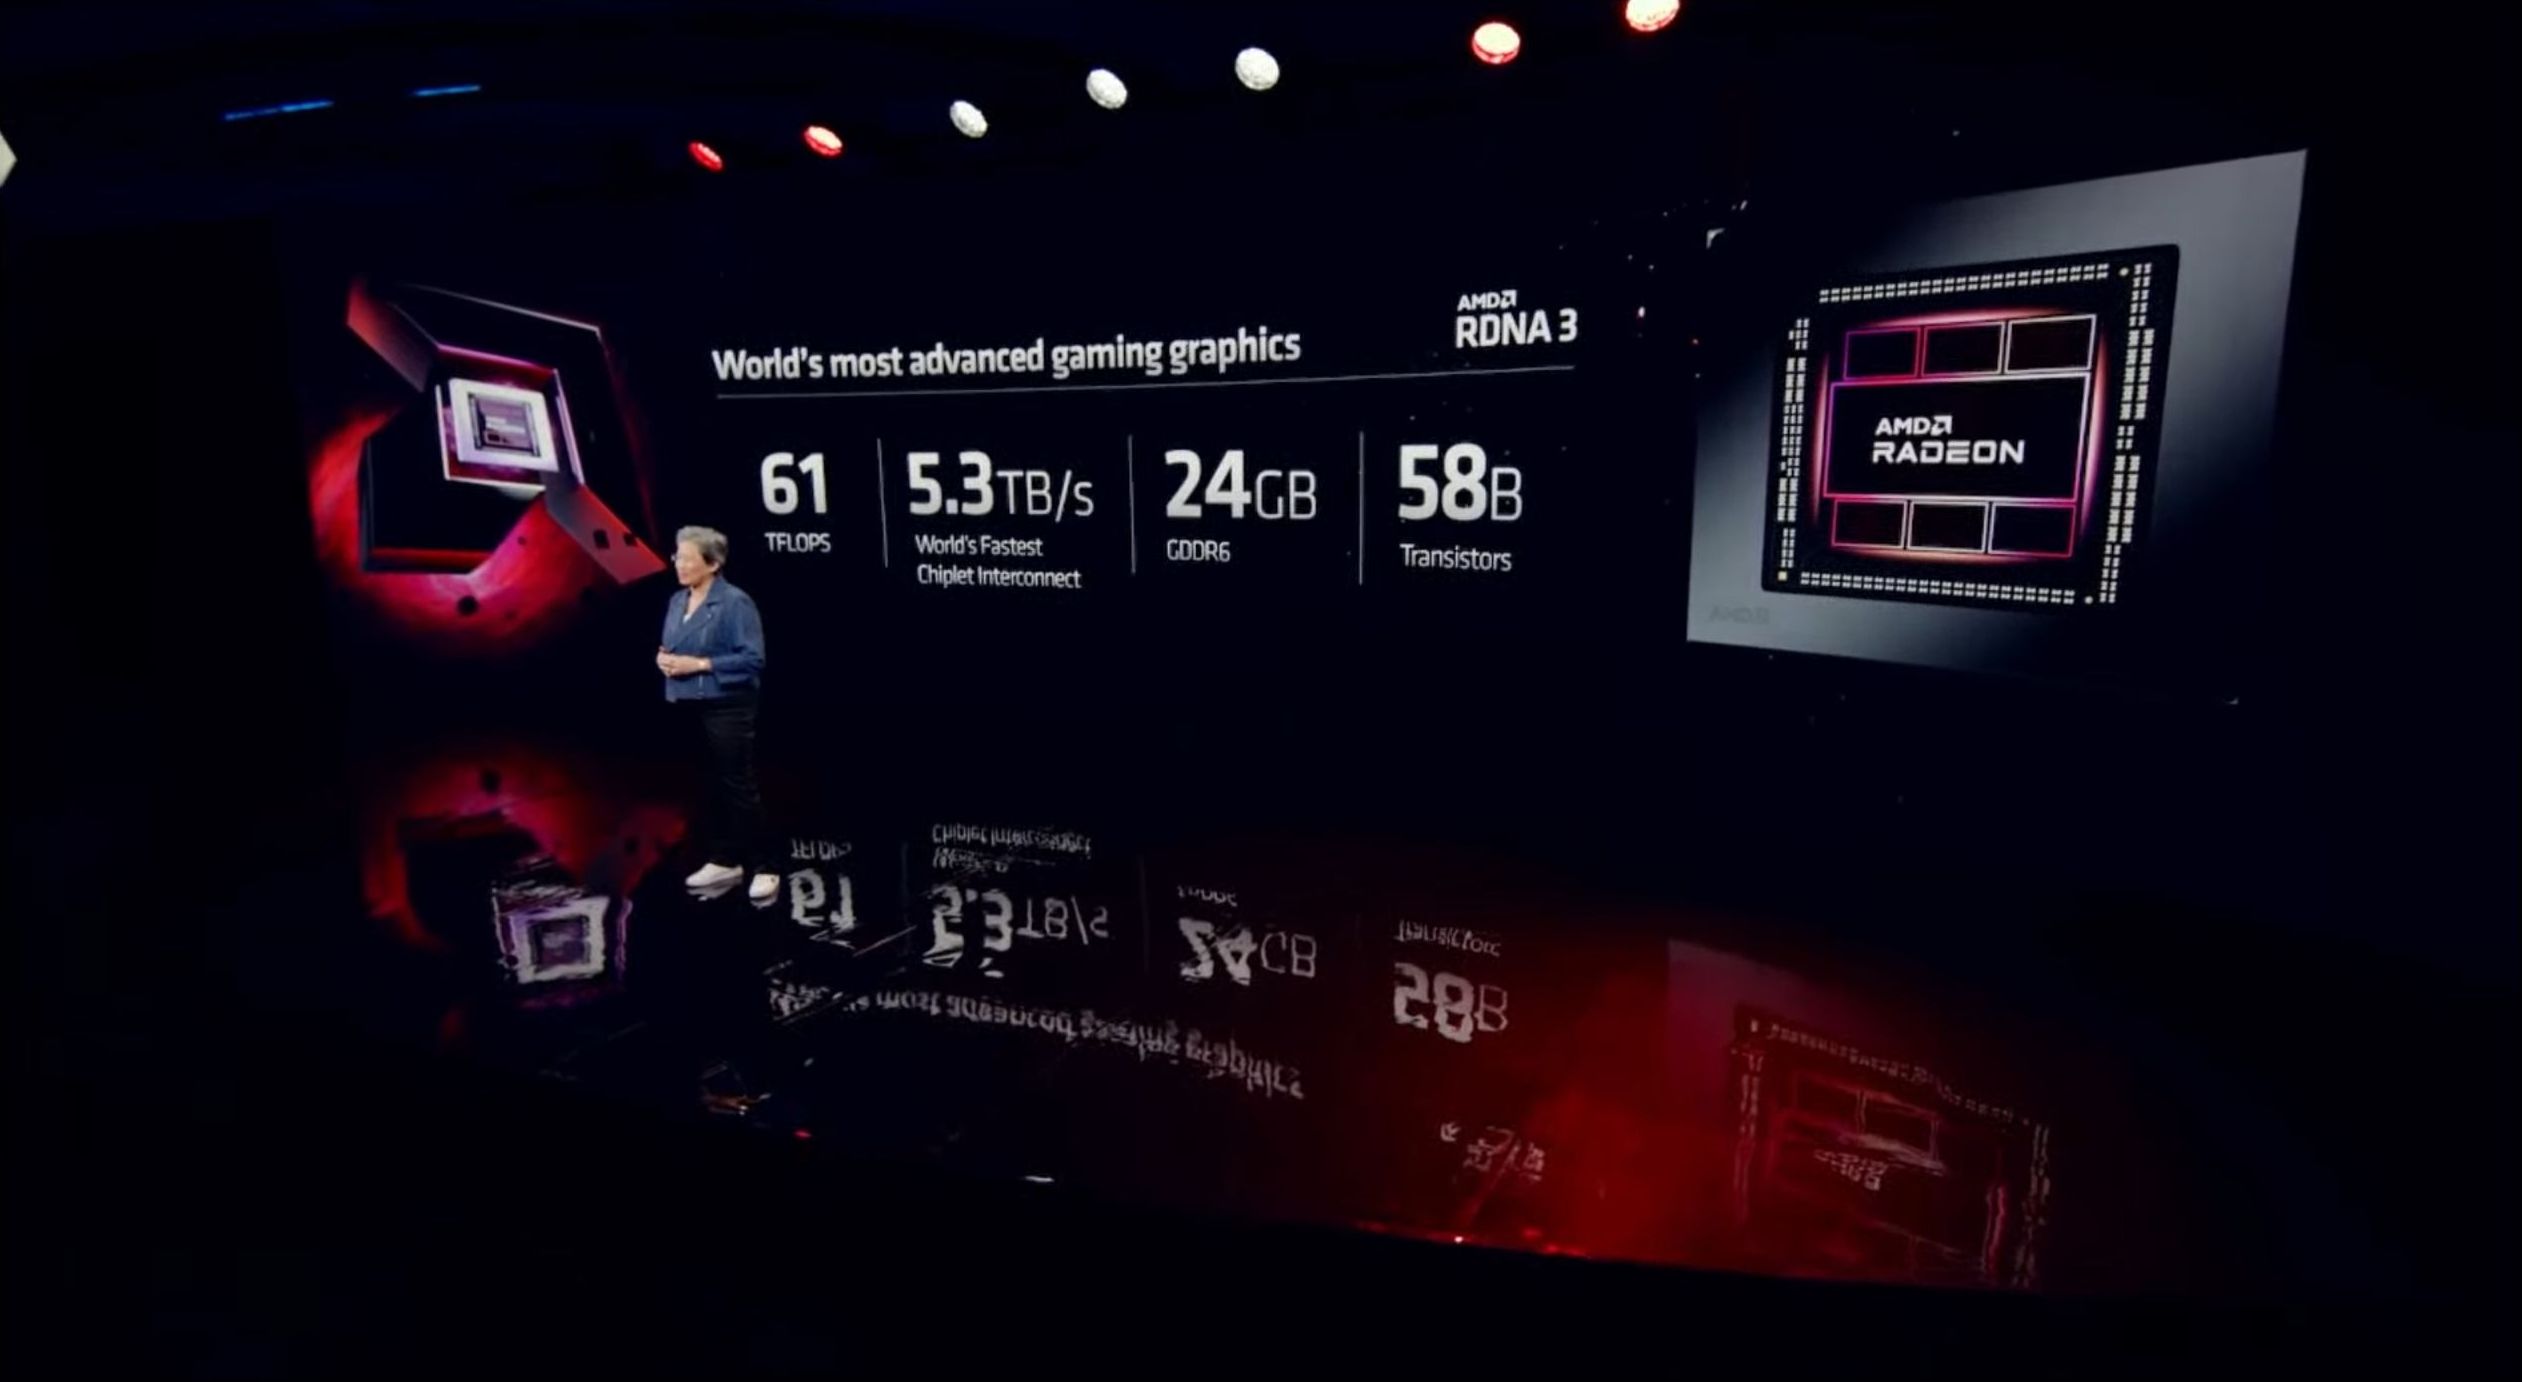 Amd Unveils World's Most Advanced Gaming Graphics